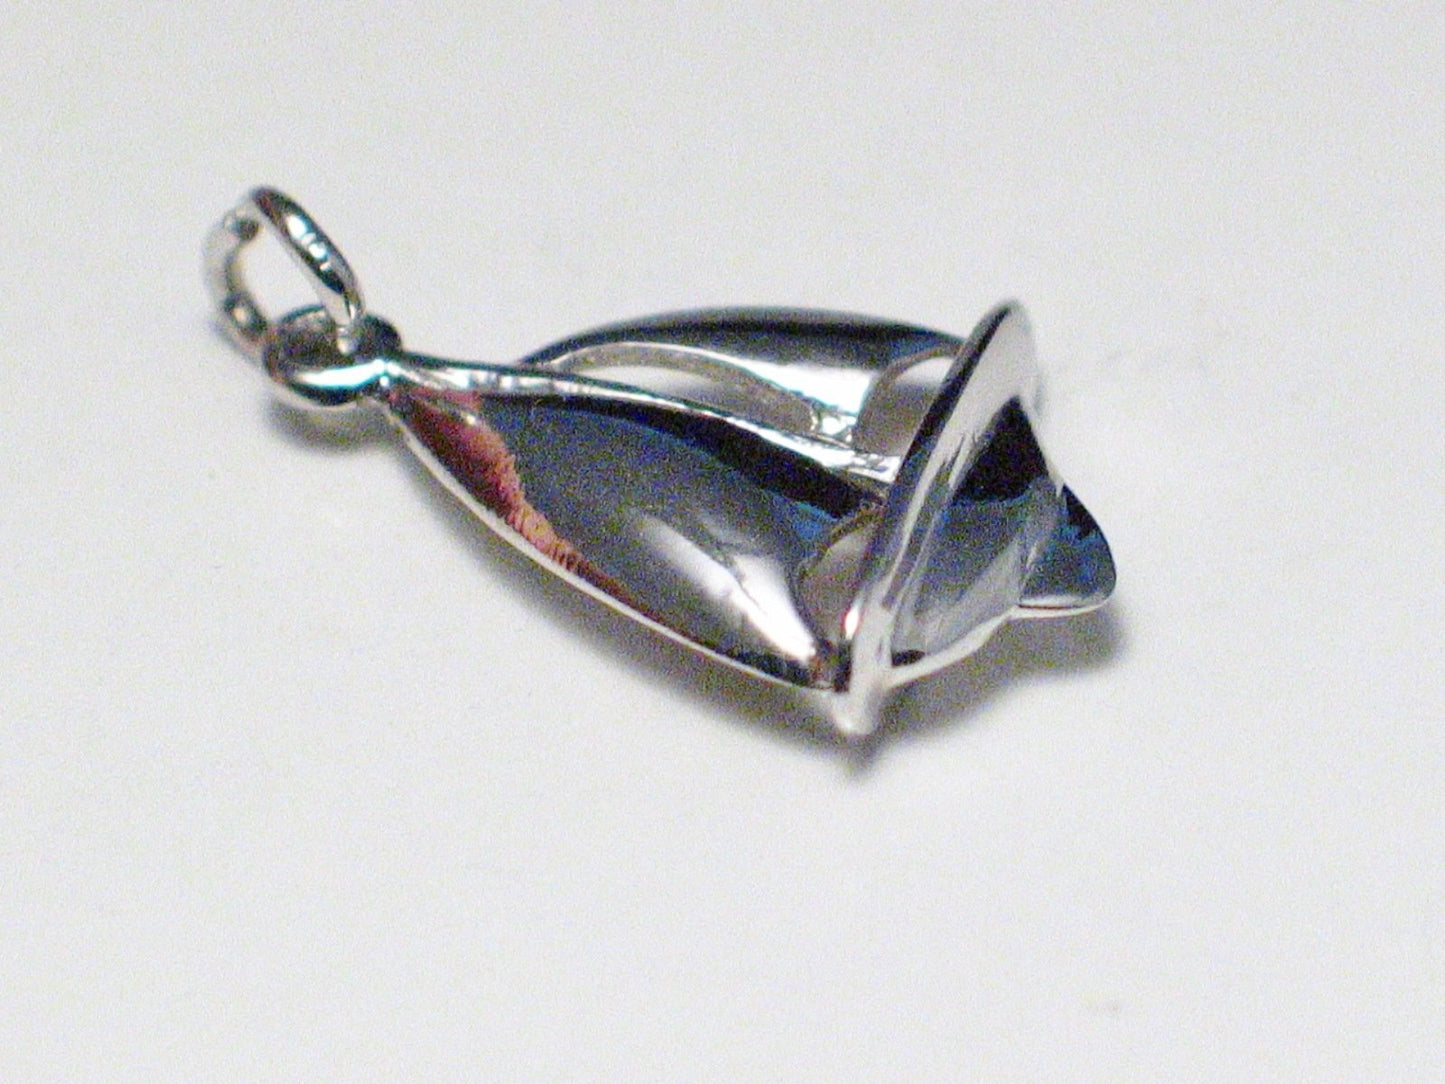 Charm | Small Sterling Silver Nautical Sailboat Charm | Discount Estate Jewelry - Blingschlingers Jewelry